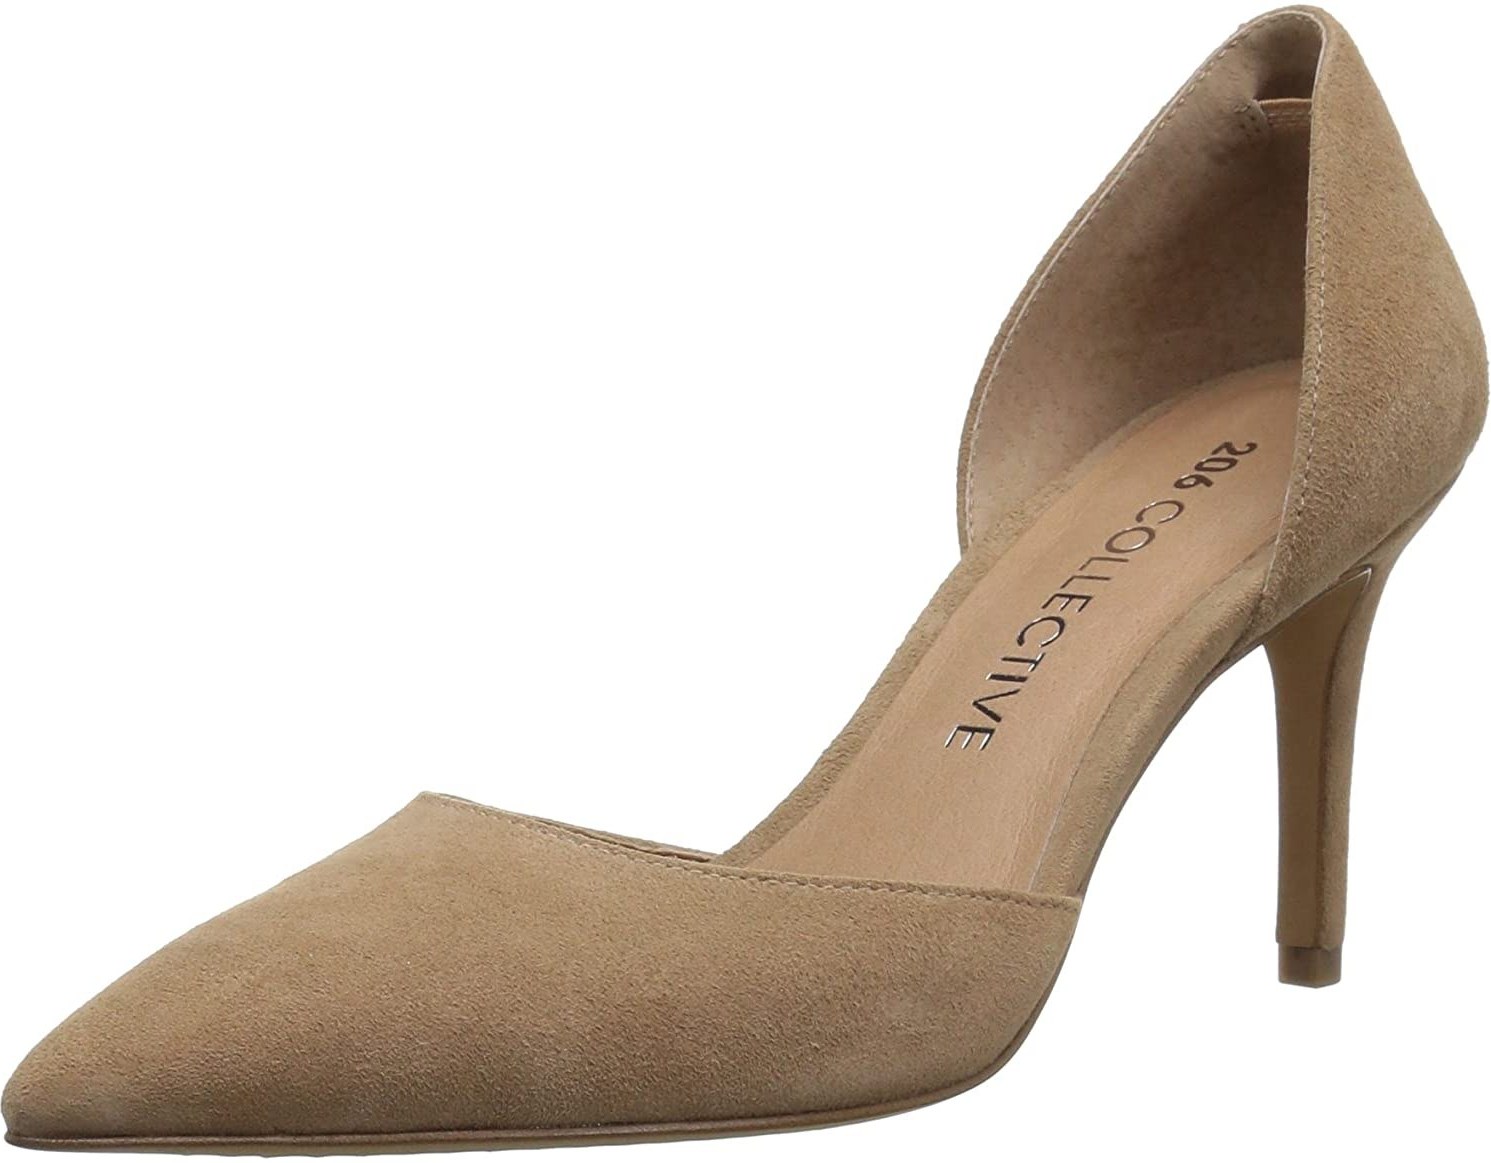 206 Collective Womens Adelaide D'Orsay Dress Pump Pump 